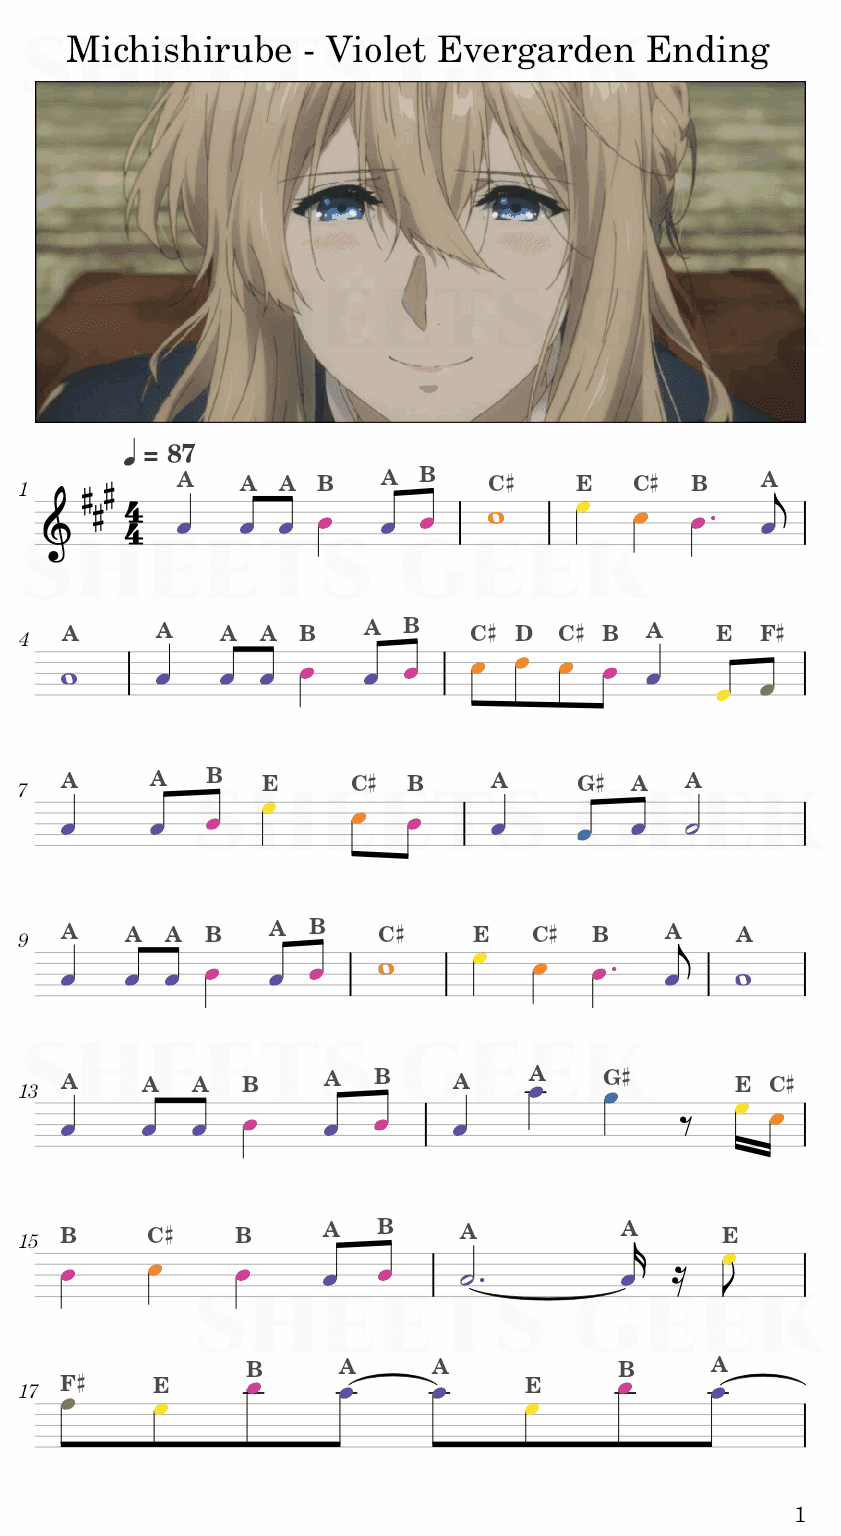 Michishirube - Violet Evergarden Ending Easy Sheet Music Free for piano, keyboard, flute, violin, sax, cello page 1